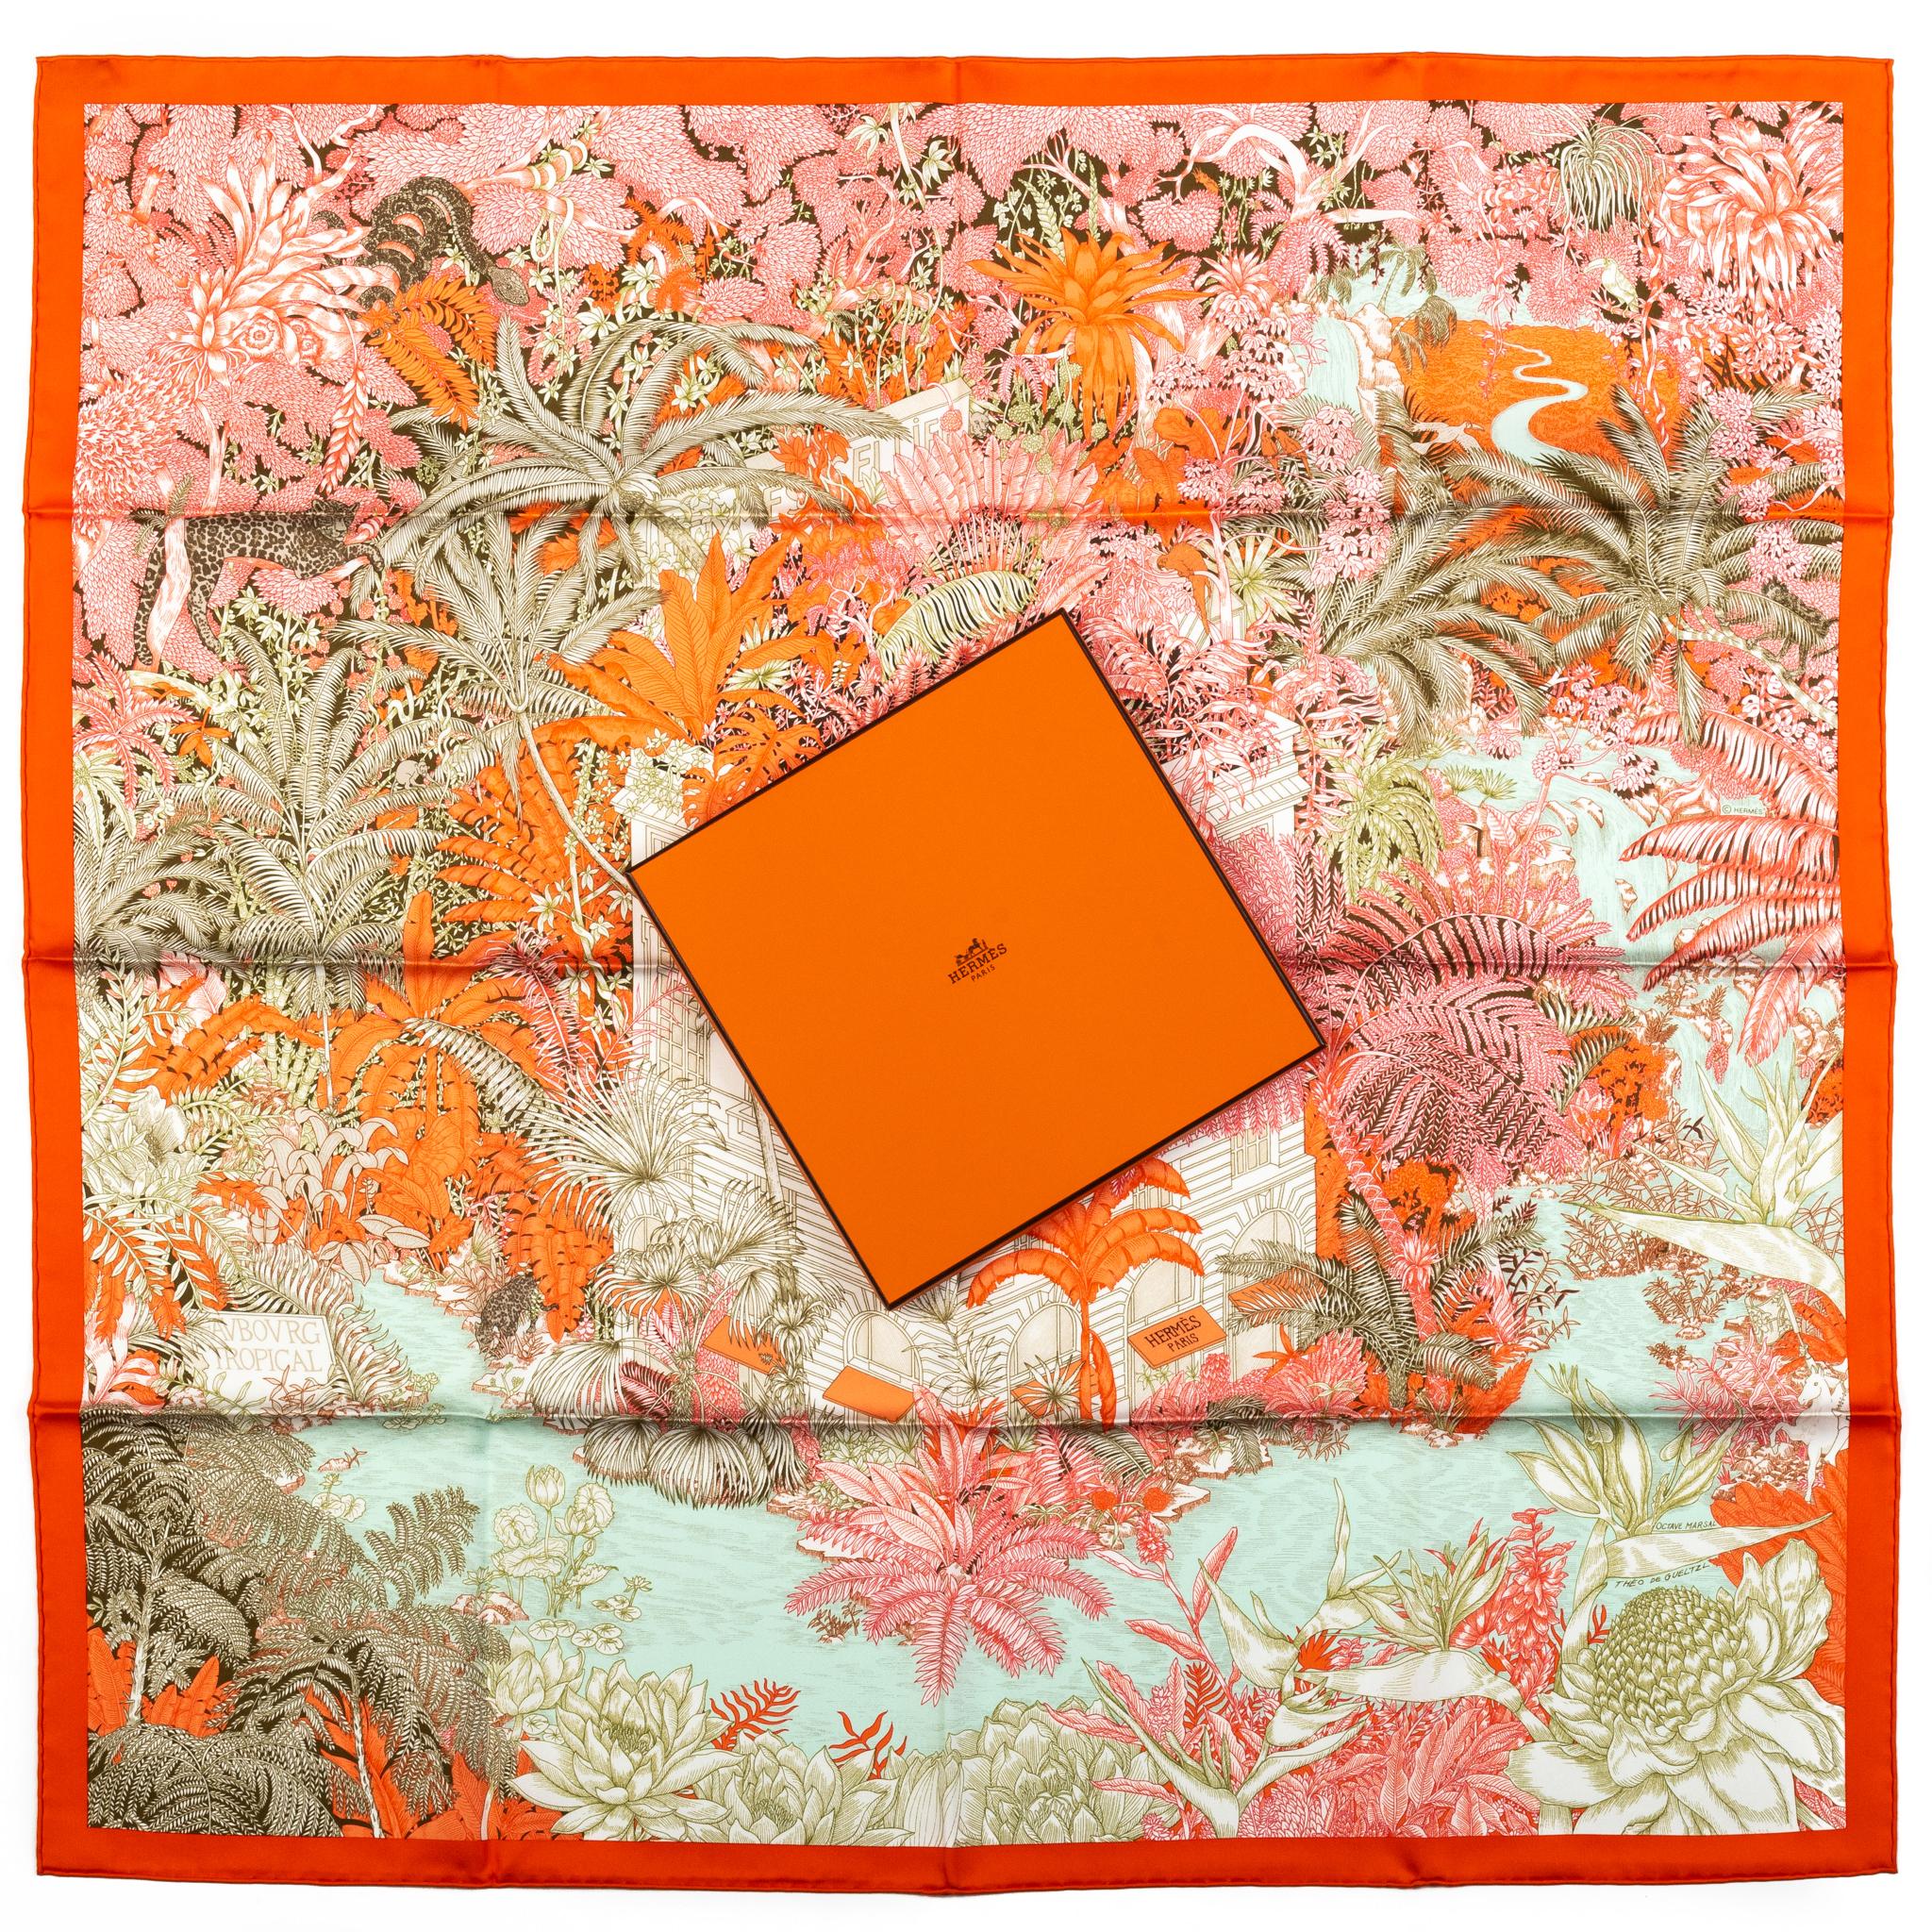 Hermès collectible tropical garden orange and pink silk scarf. Hand-rolled edges. New in box.